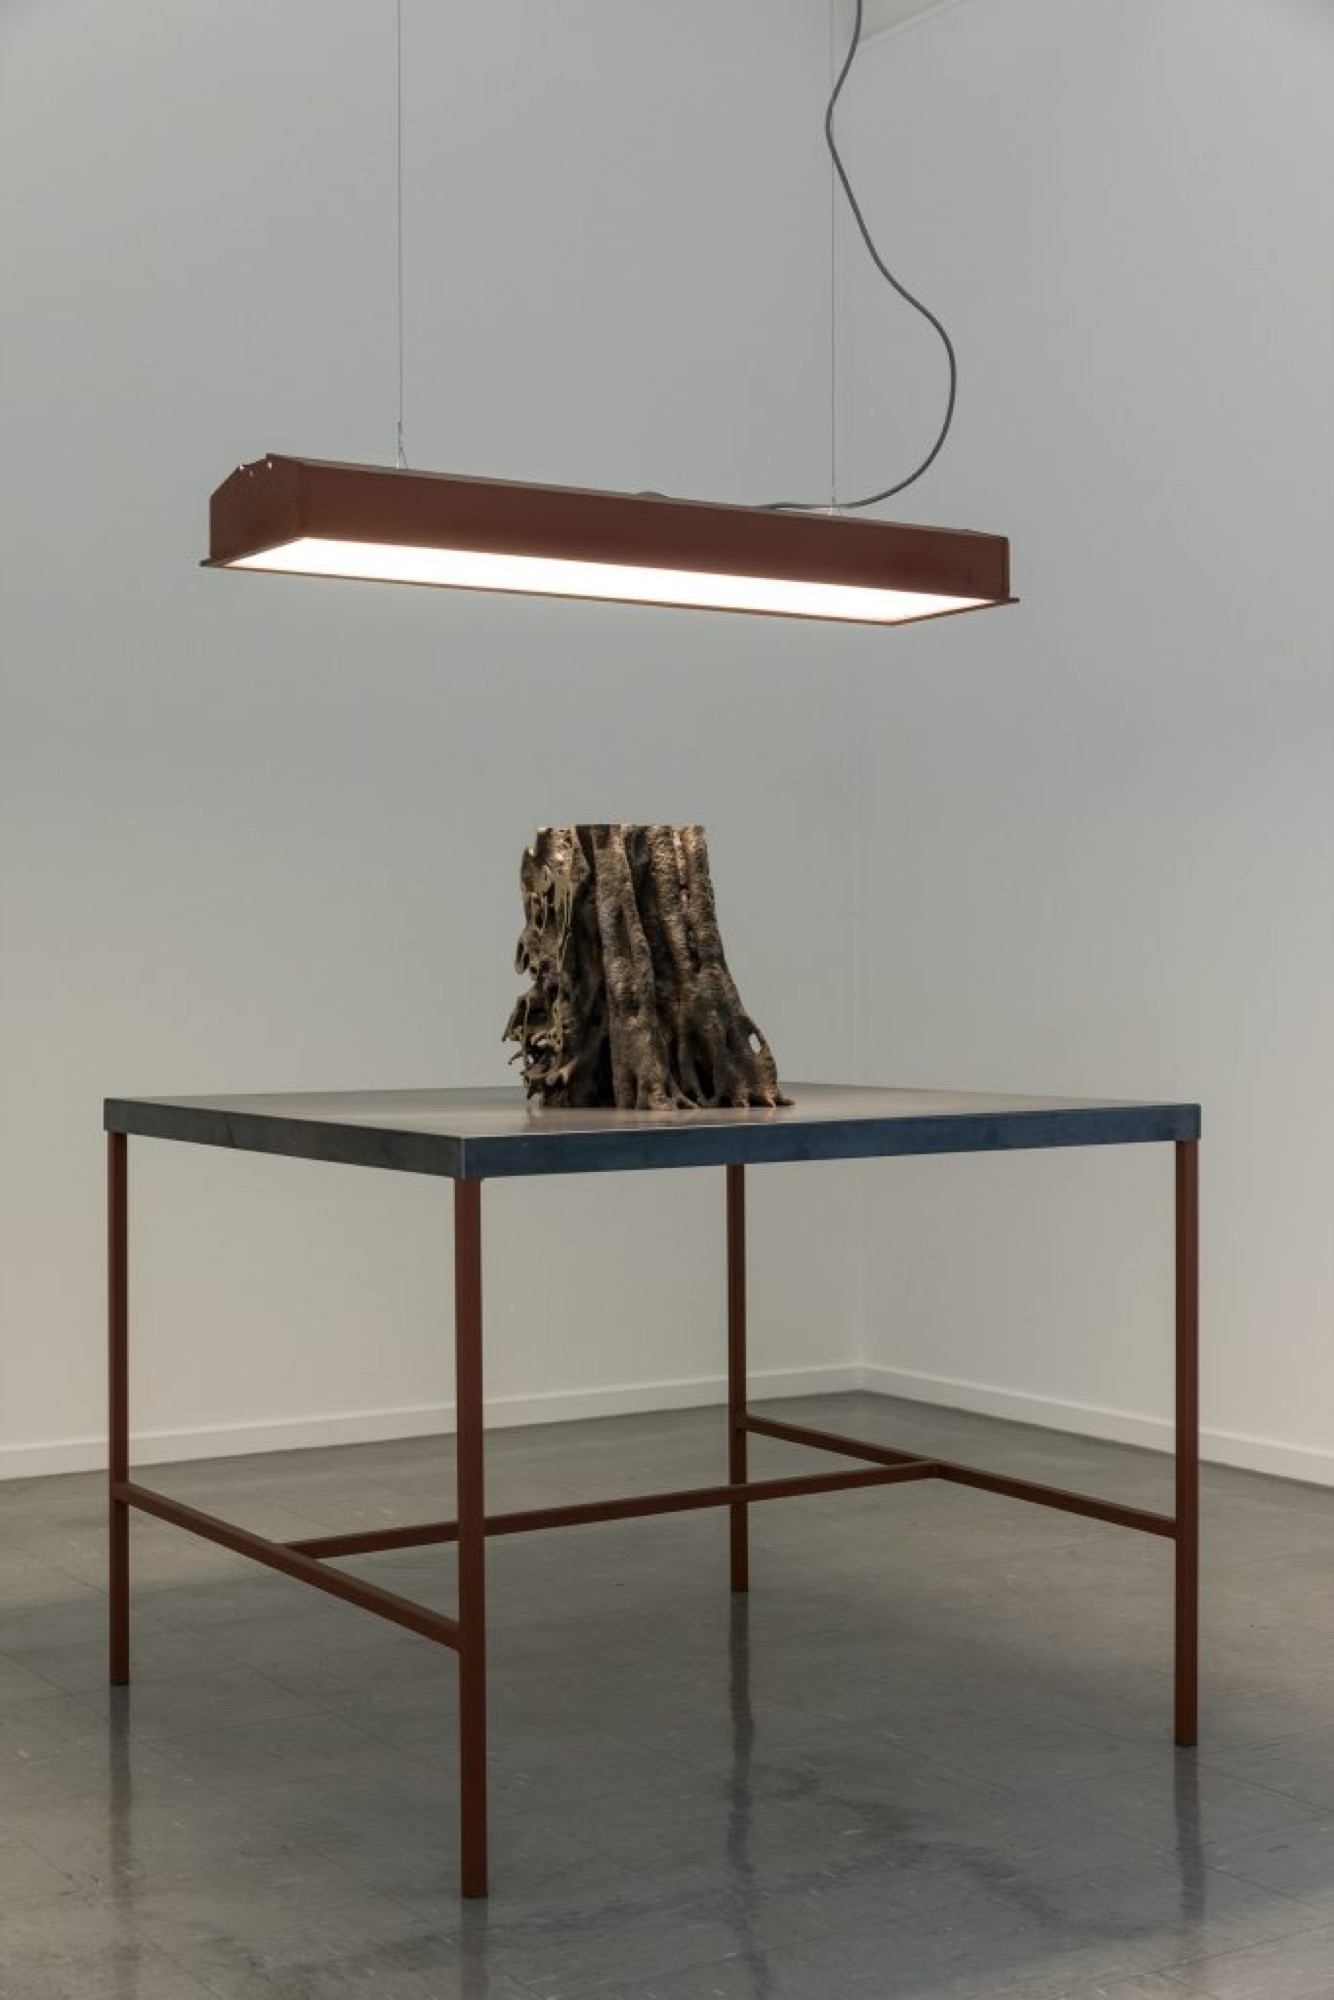 Nicholas Mangan, Termite Economies (Root Cause), 2019, Bronze, steel and ply table and custom lighting, Dimensions variable. Photography: Andrew Curtis.